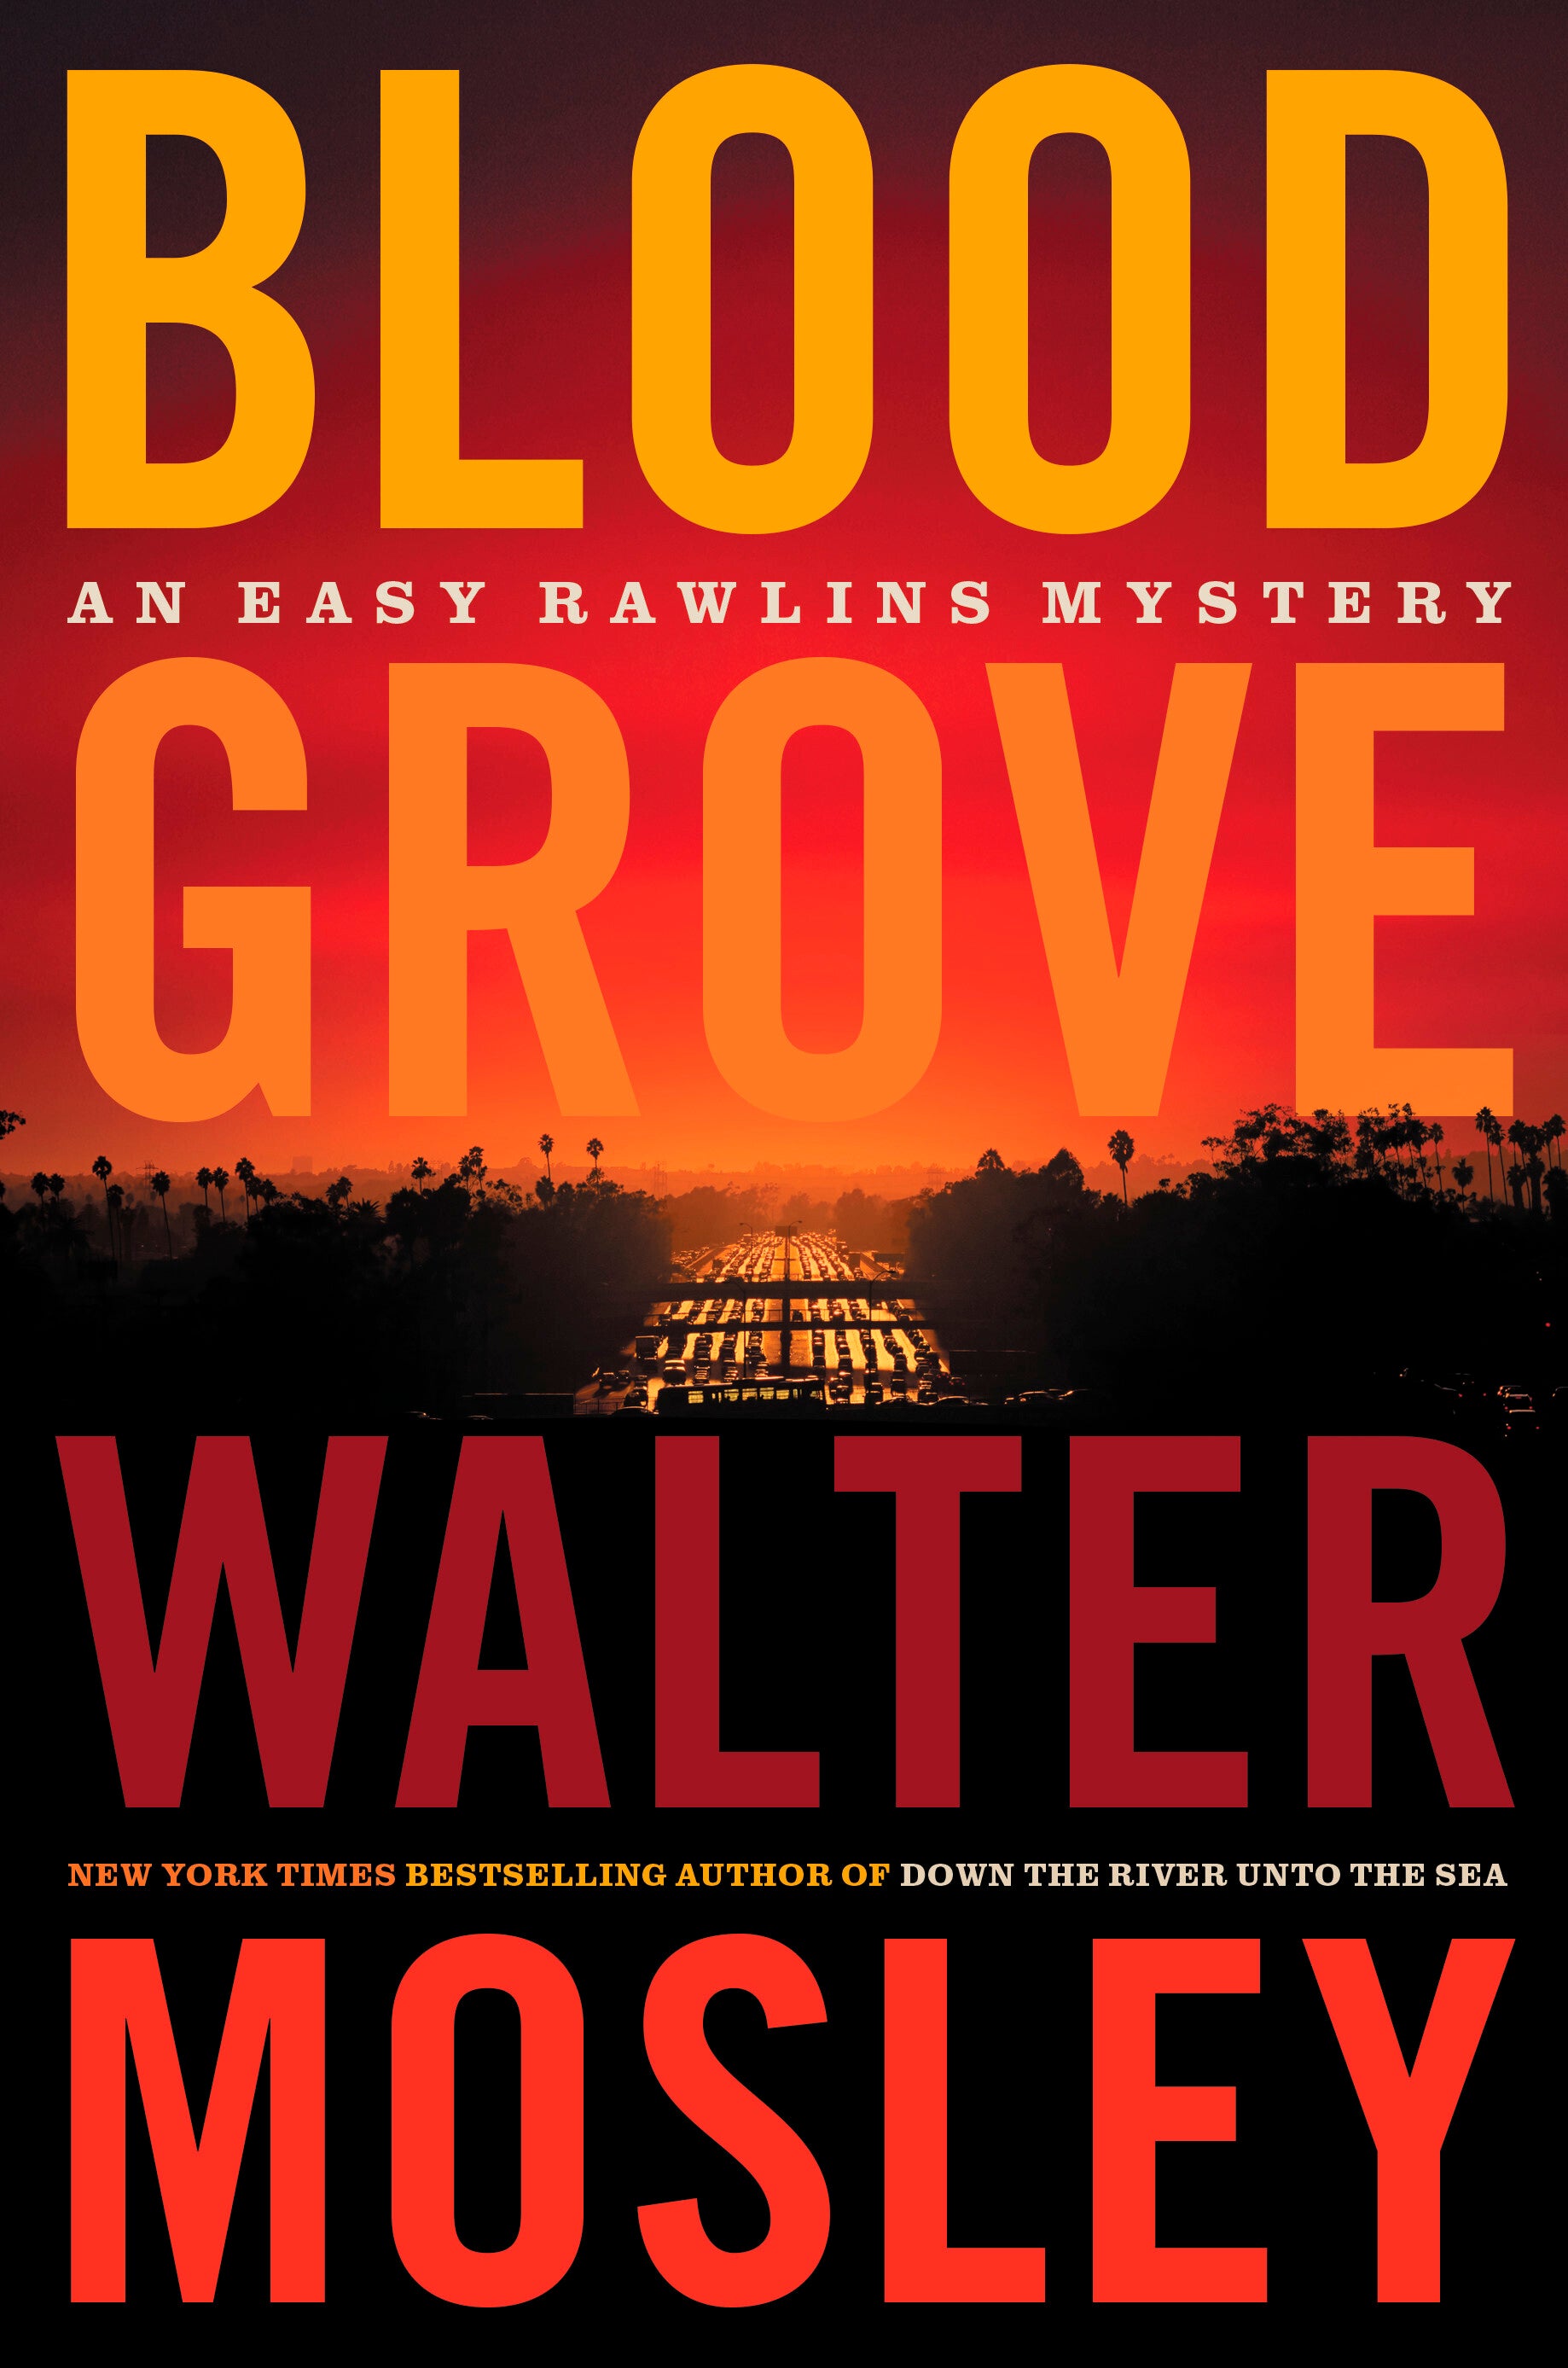 Book Review - Blood Grove